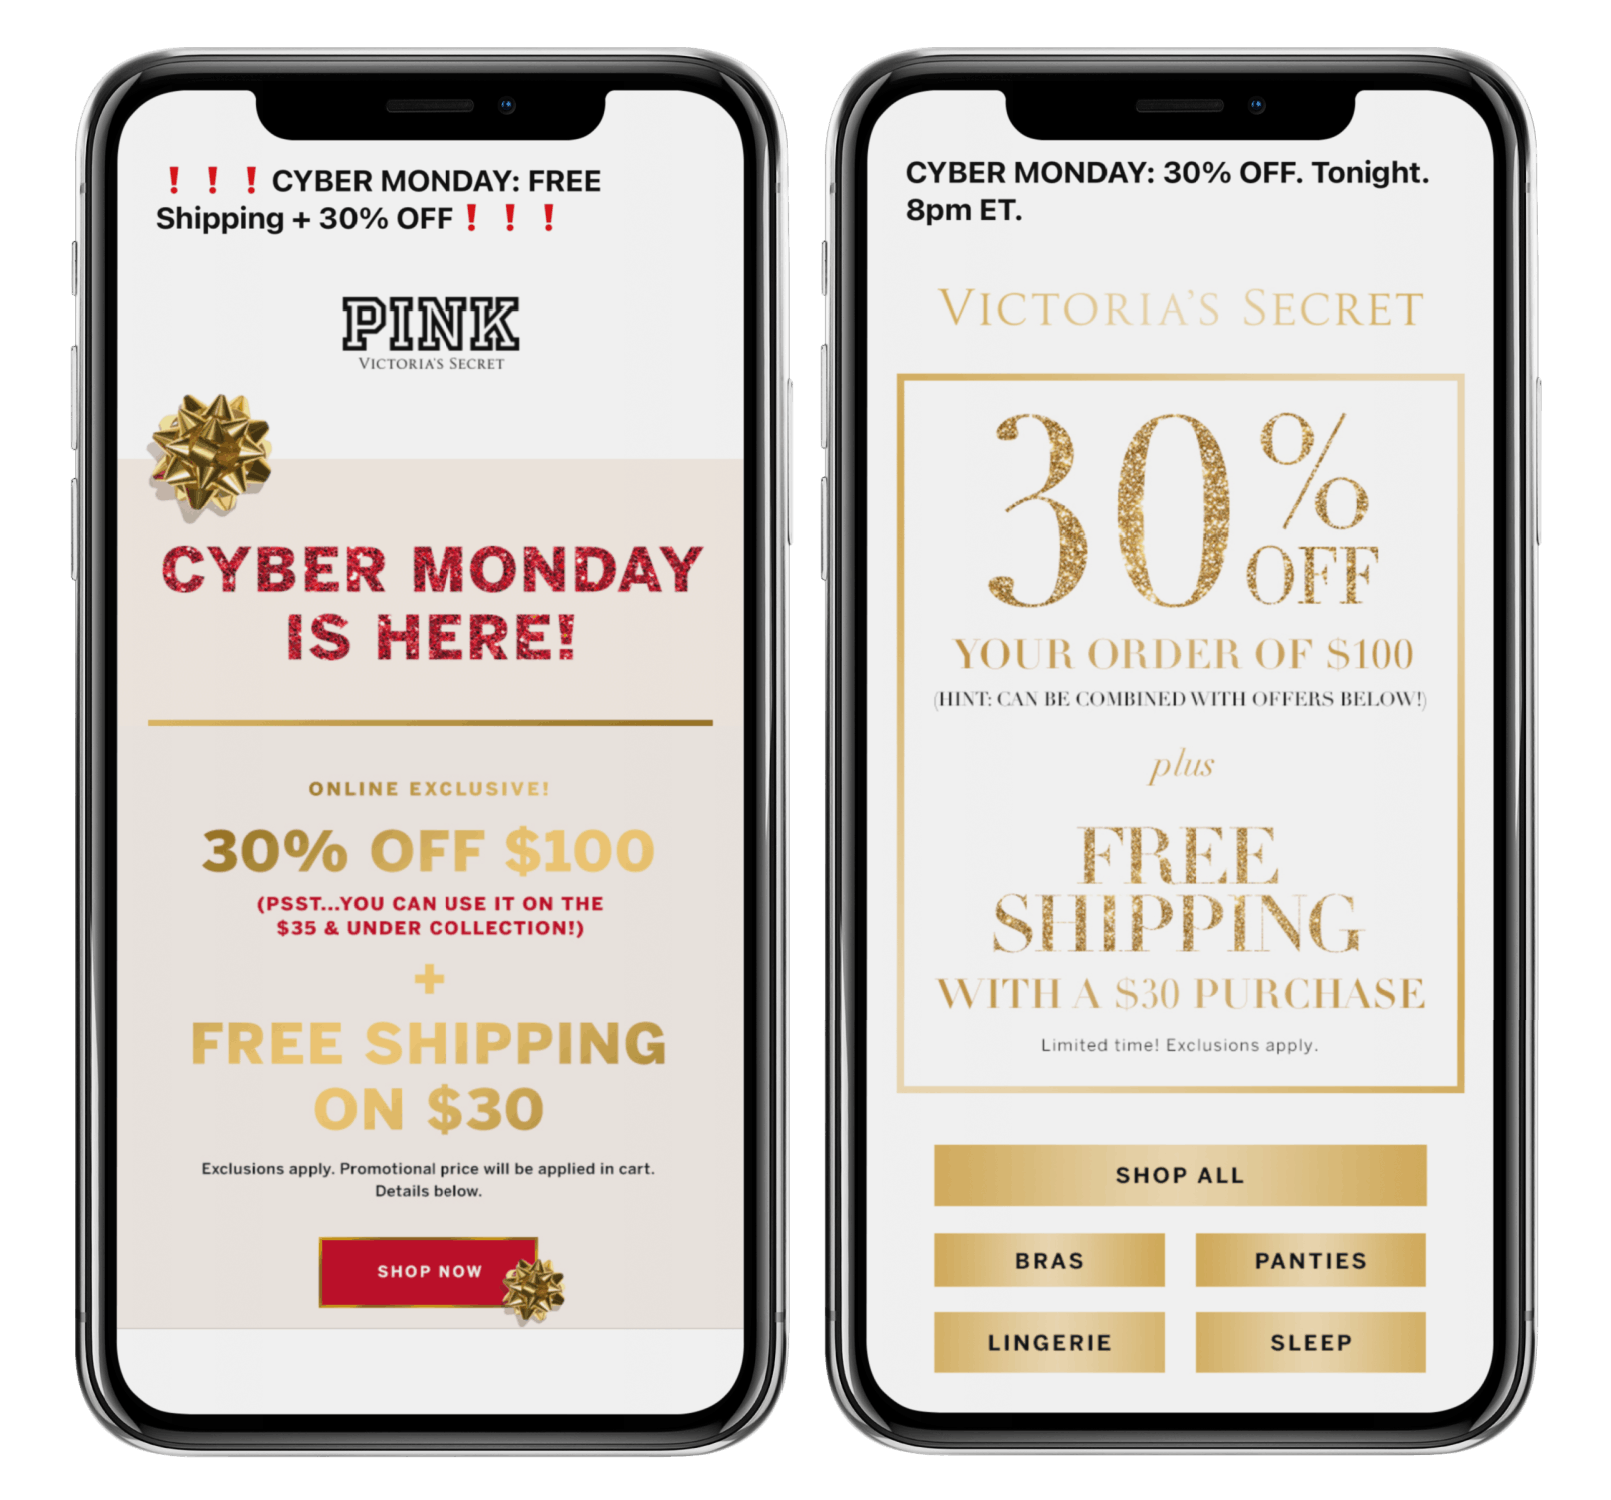 How to Get Free Shipping at Victoria's Secret